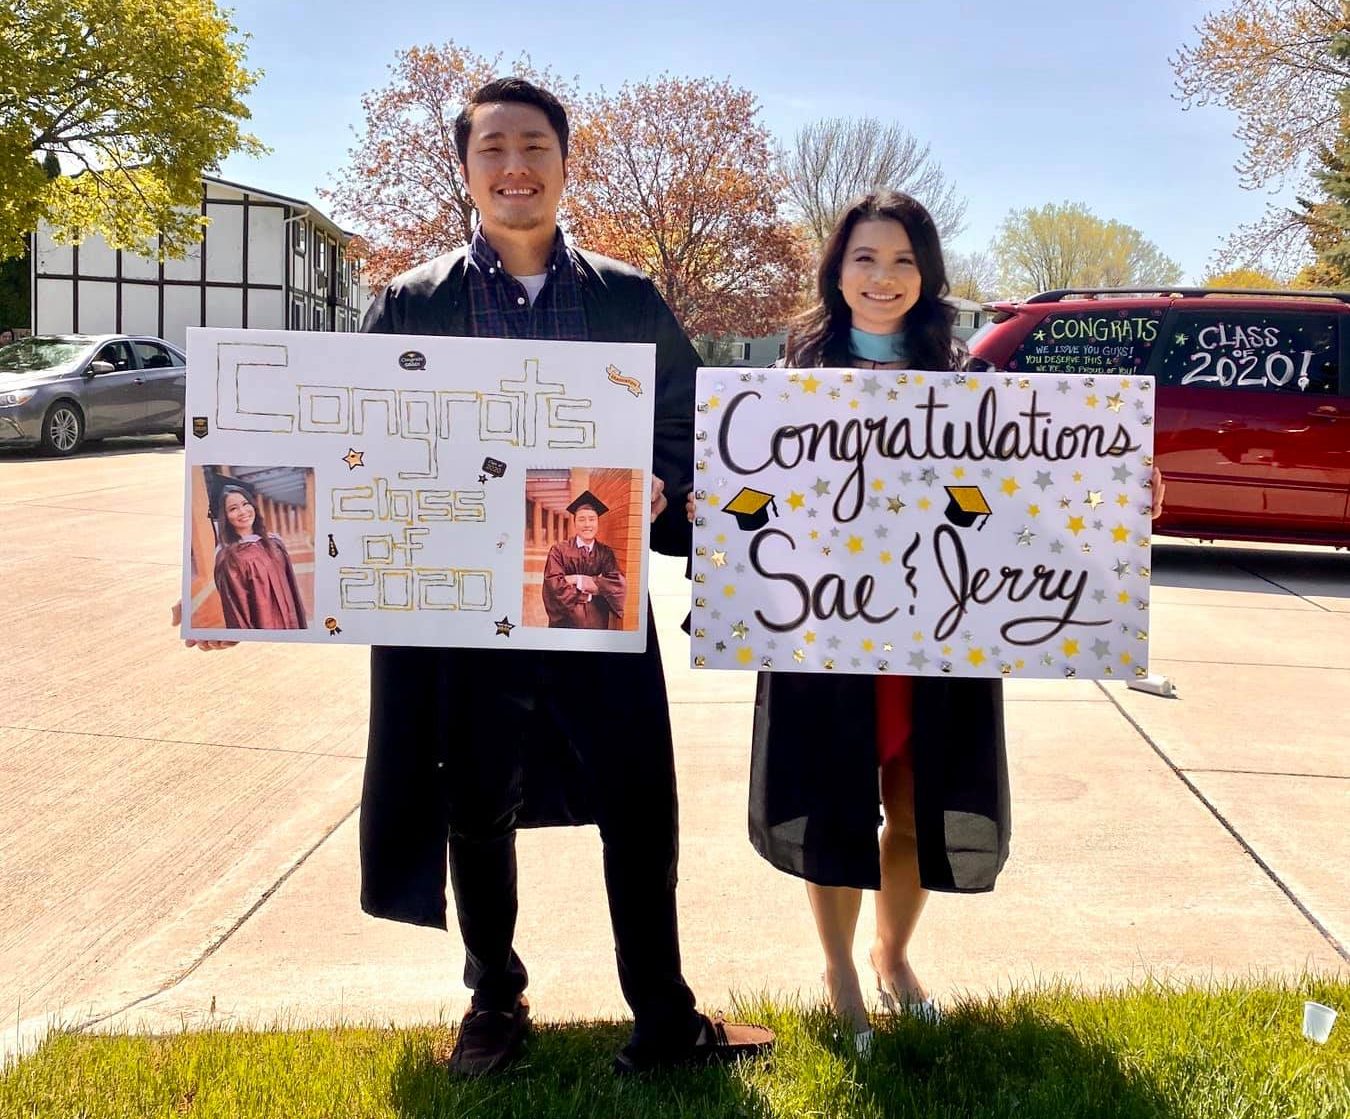 Associate Principal Yang (right) and her husband, Jerry (left), celebrate graduating with their masters degrees with a graduation parade during COVID. Photo provided by Sae Yang.